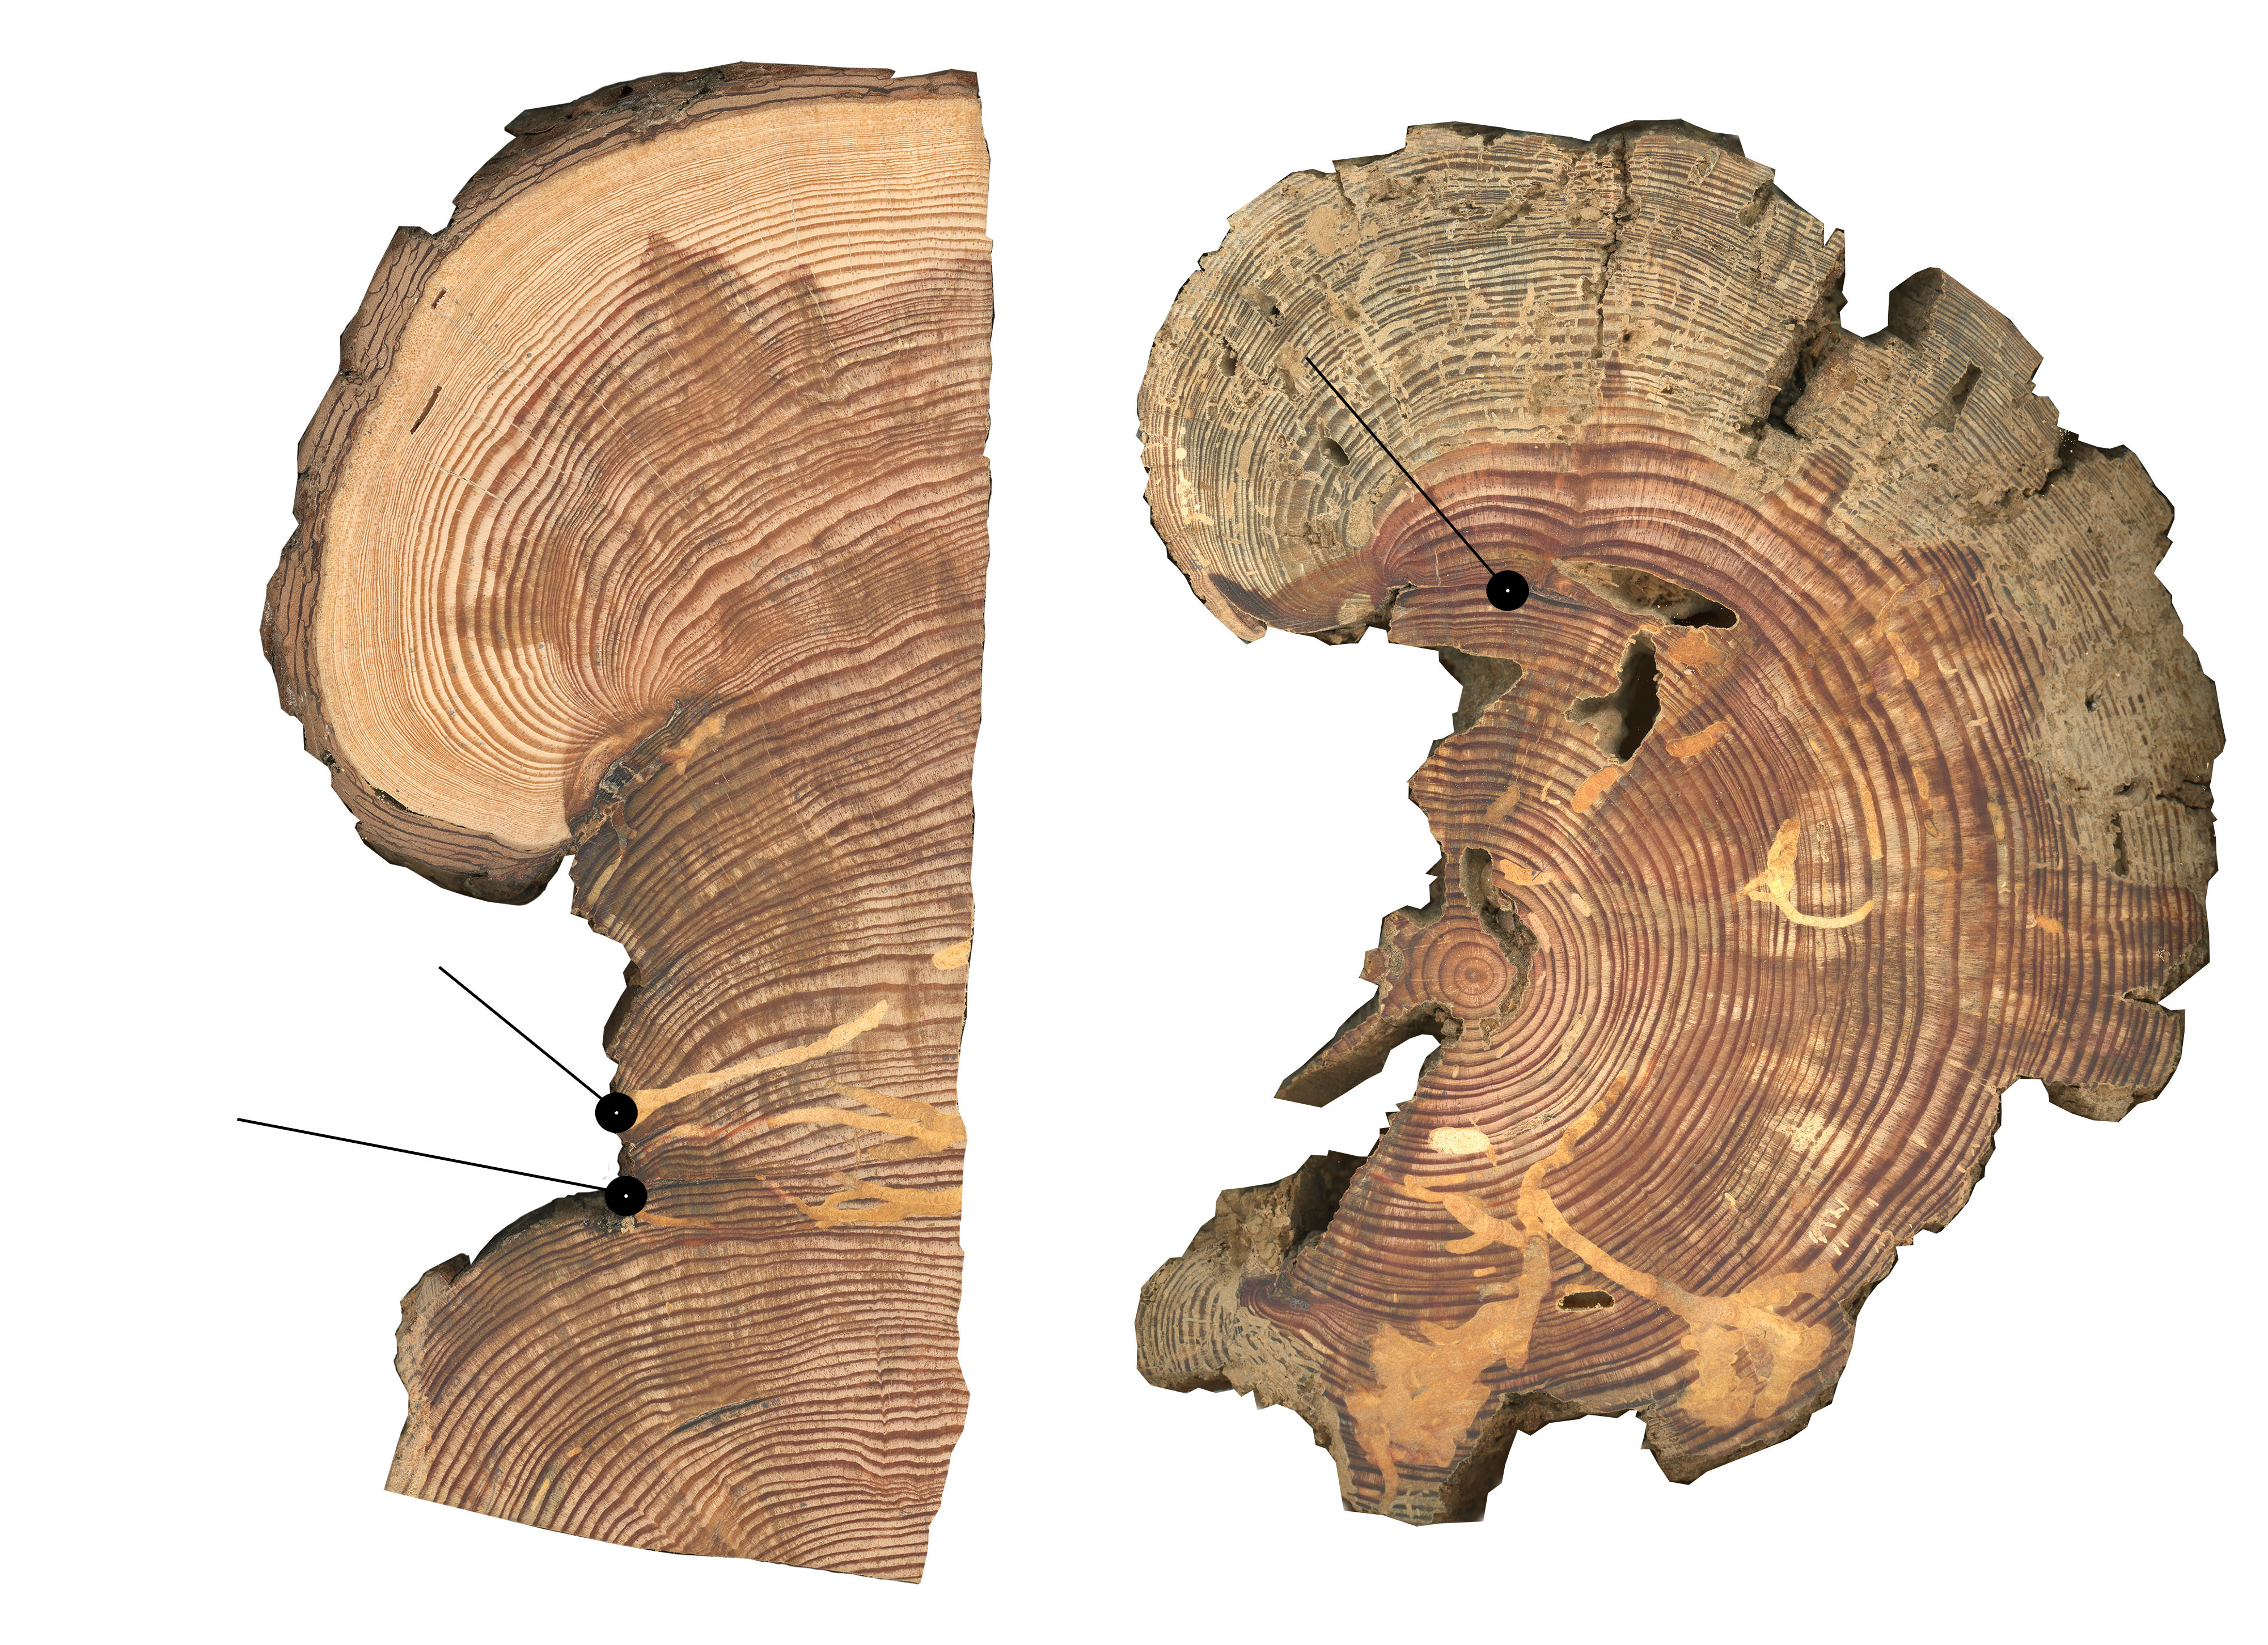 Tree cookie section showing fire scars and tree rings